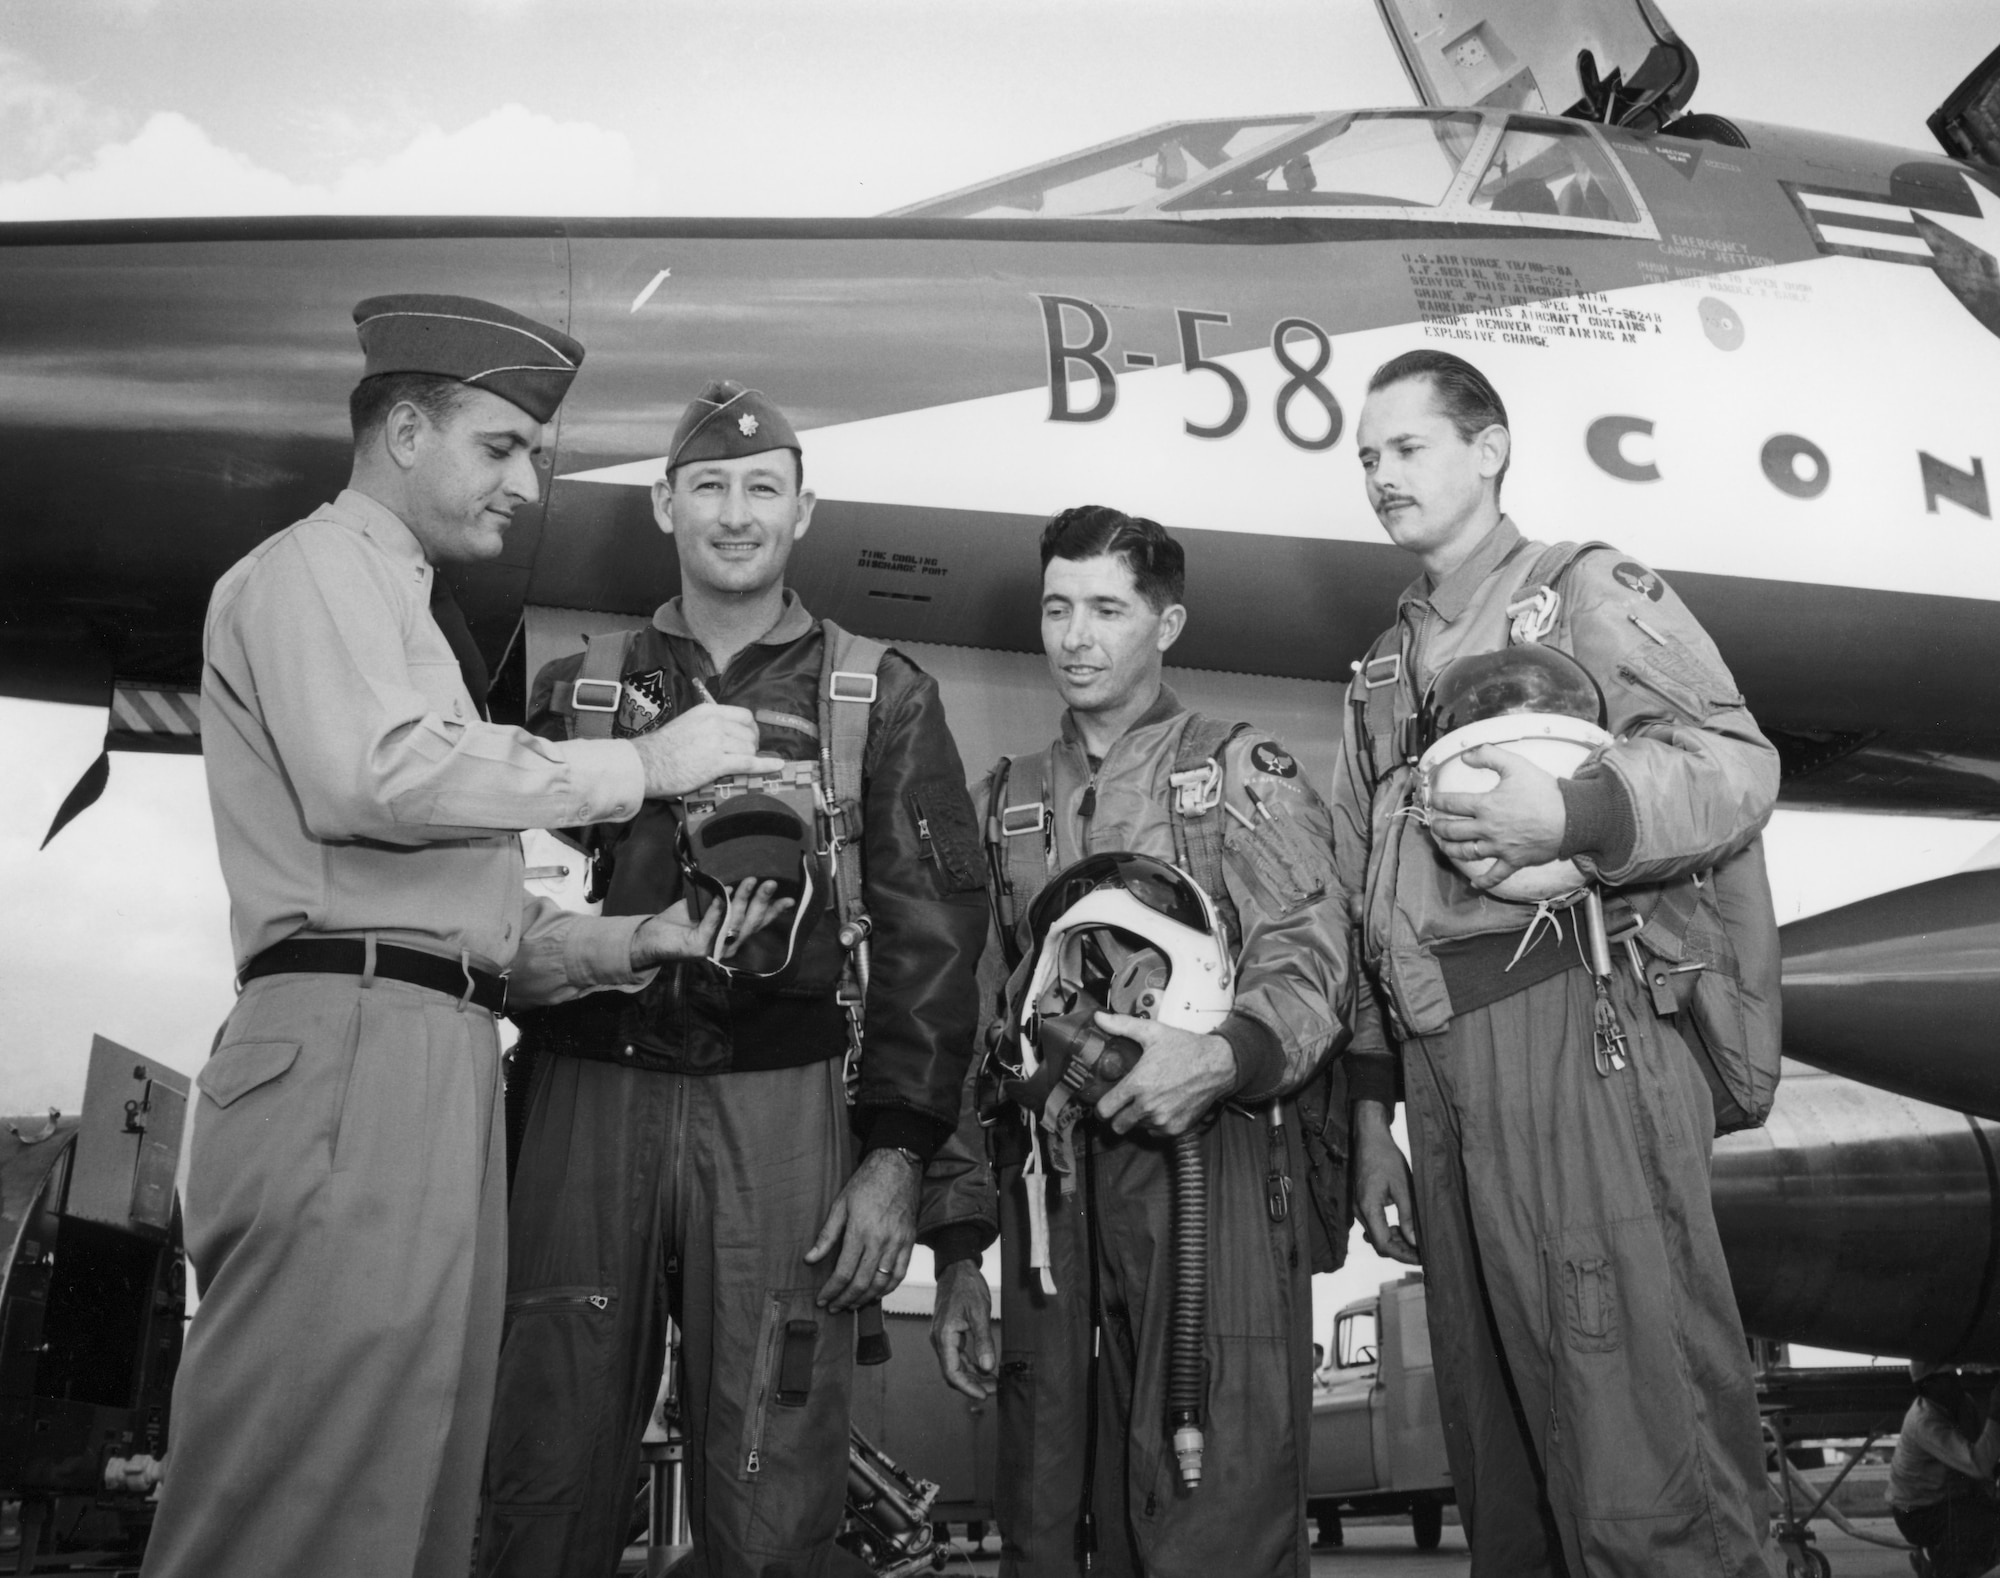 Lt. Johnny Armstrong (left) stands with his B-58 crewmates Maj. Fitz Fulton, Maj. Cliff Garrington and Everett Dunlap in front of the aircraft in 1957. Armstrong flew in this test and support aircraft making him the first non-rated U.S. Air Force officer to fly at Mach 2. (Courtesy photo)